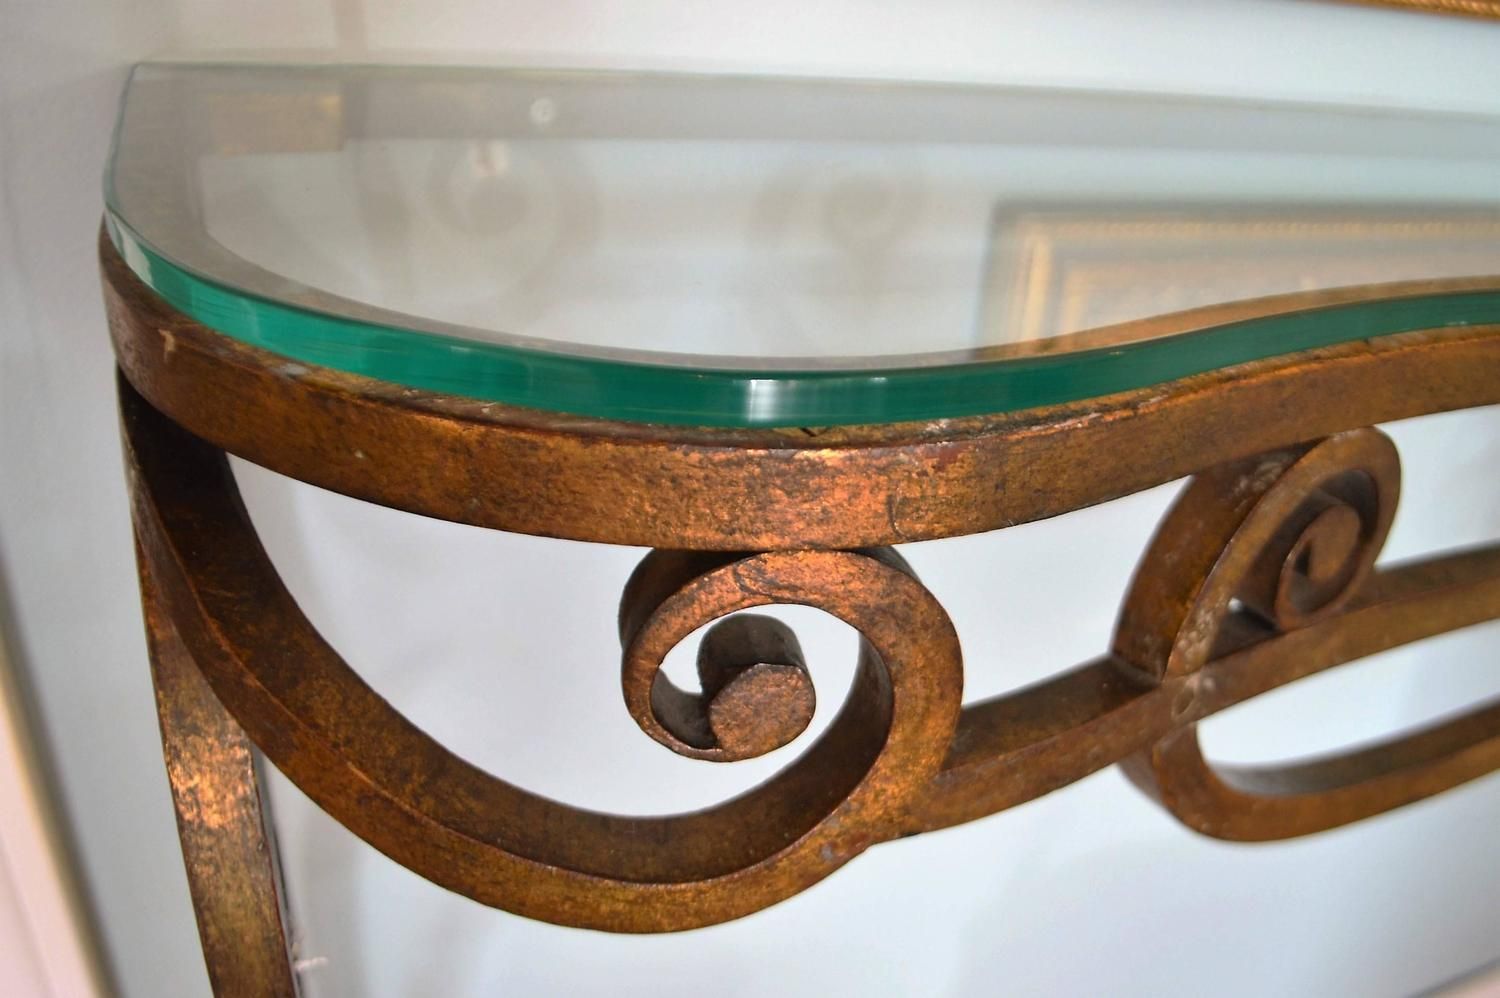 Wrought Iron Gilded Console Table With Glass Top For Sale At 1stdibs Regarding Round Iron Console Tables (View 4 of 20)